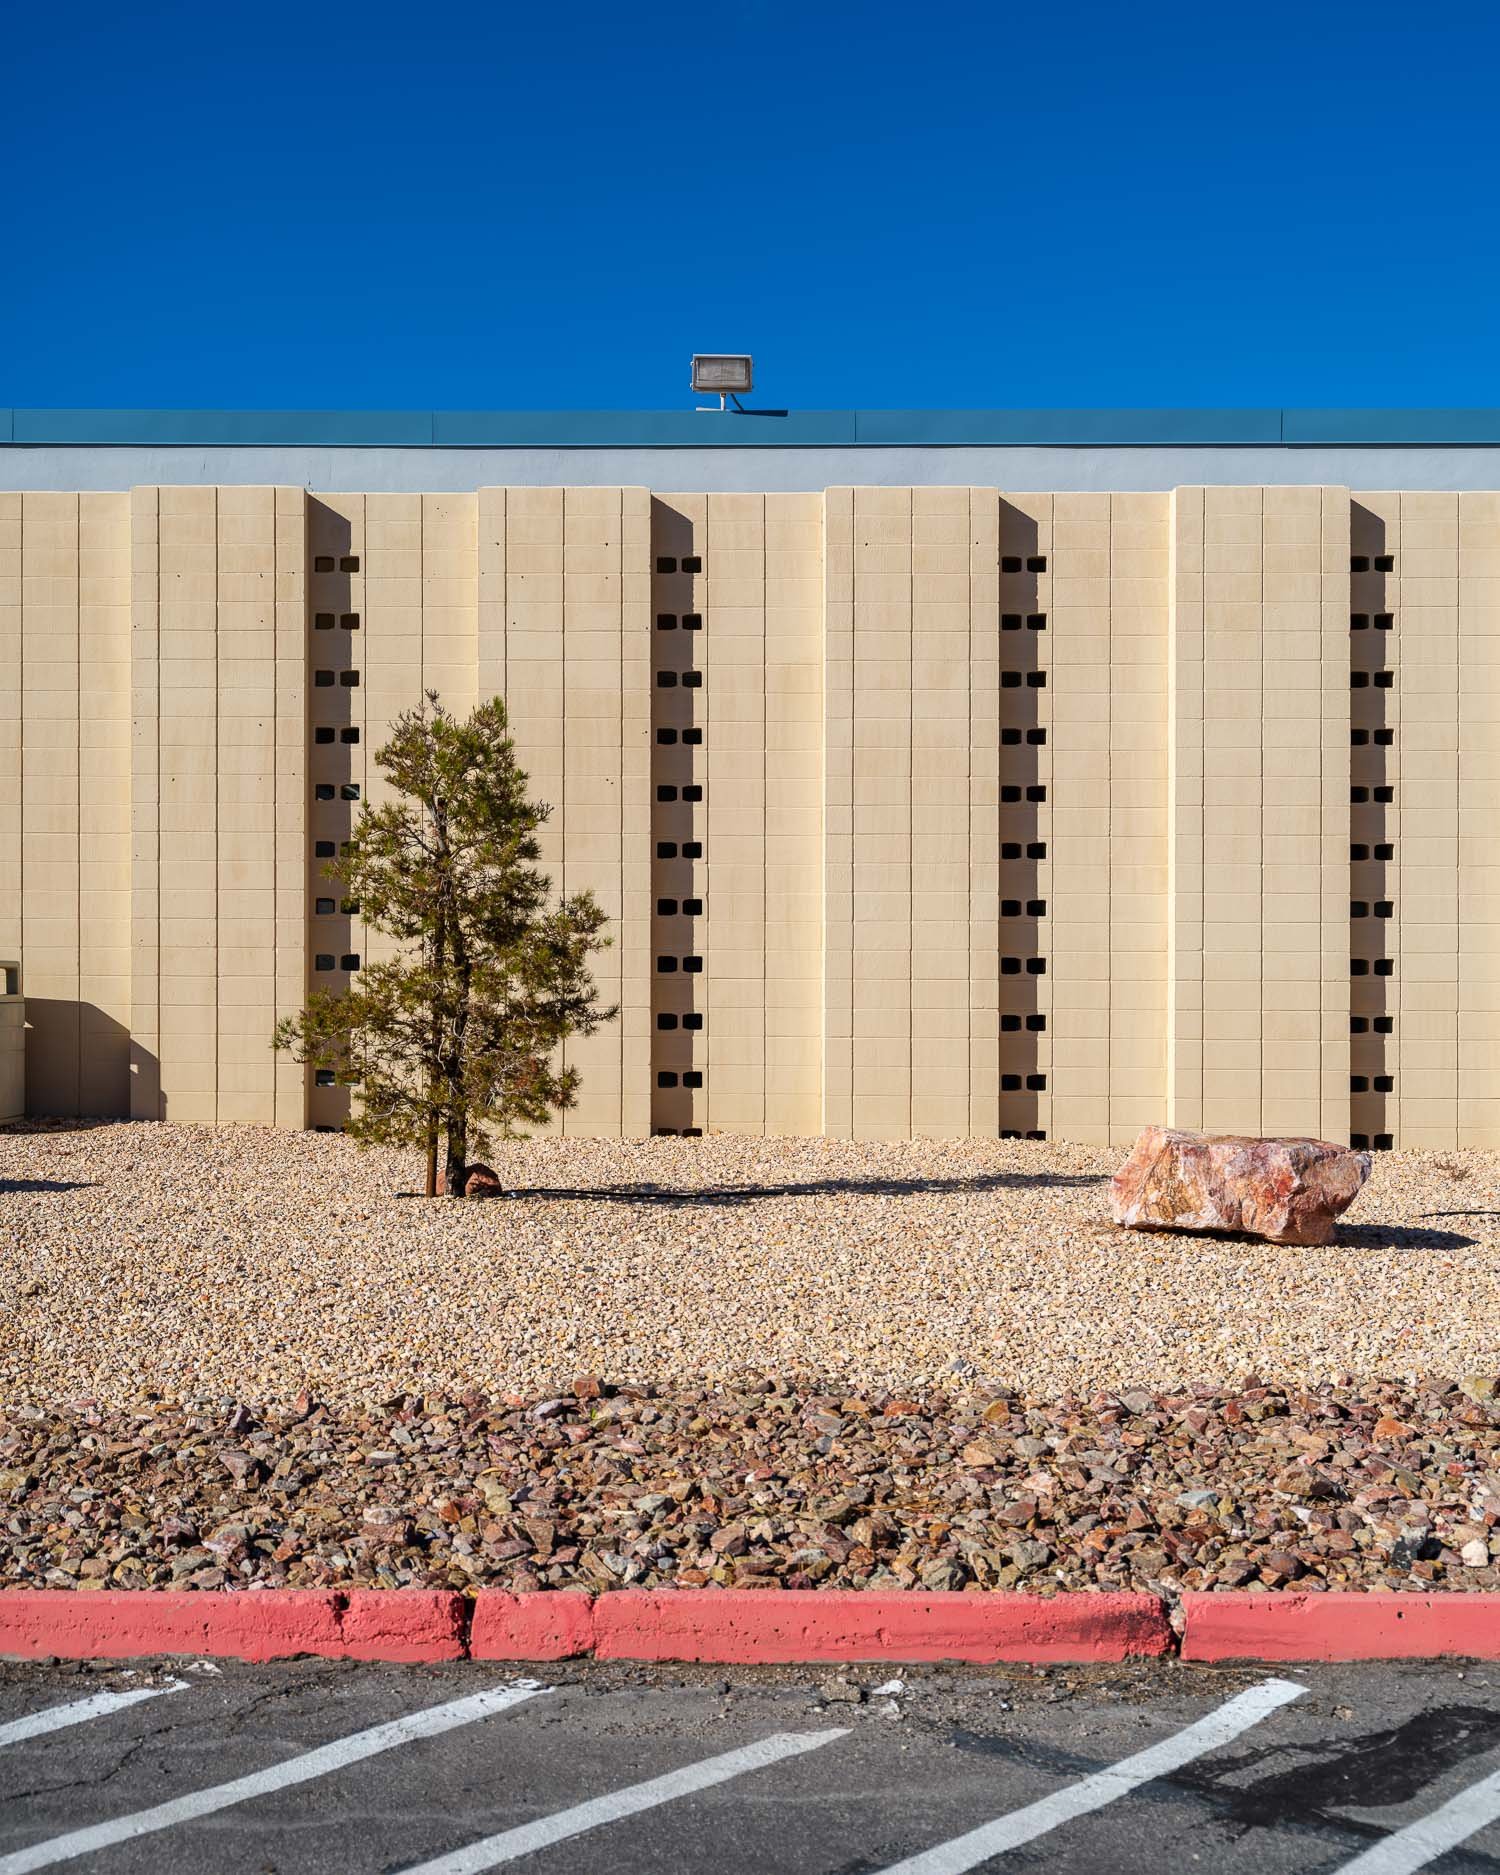  Cafeteria building at Mercury, the closed town built to house the staff of the Nevada National Security Site (NNSS).  